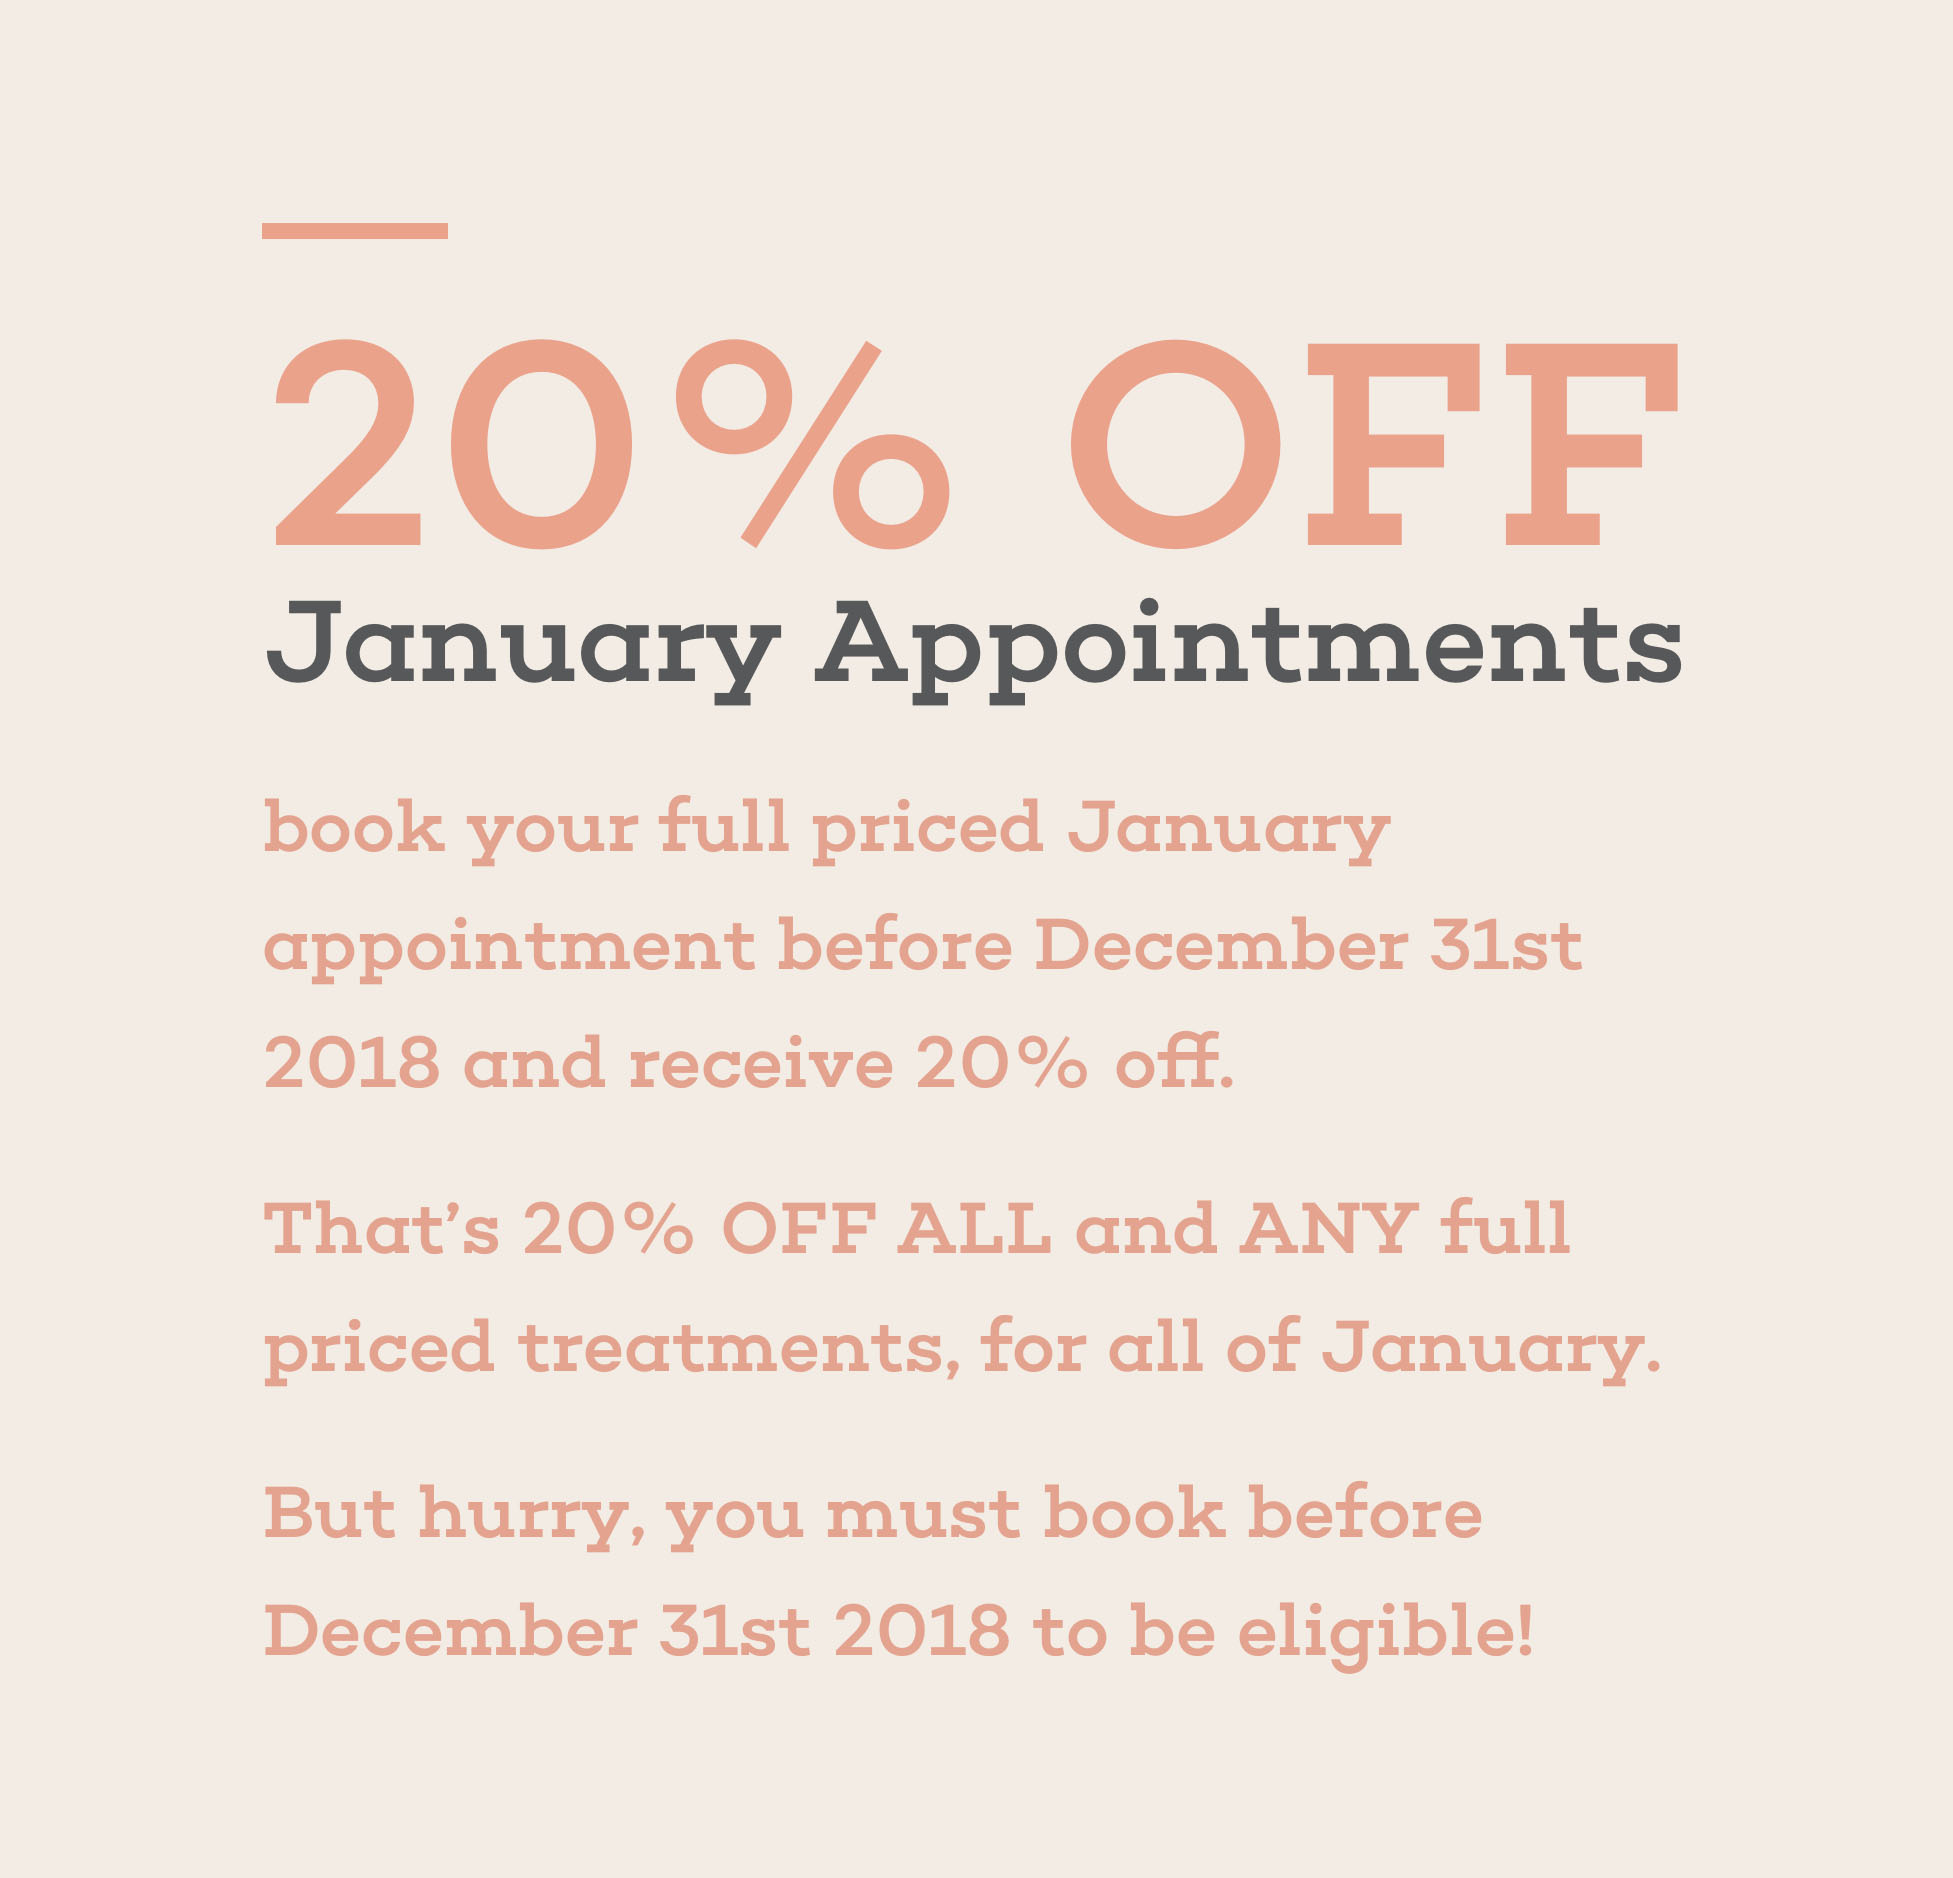 20% off, January Appointments, book your full priced january appointment before december 31st 2018 and received 20% off. That's 20% off all and any full priced treatments, for all of january. But hurry, you must book before december 31st 2018 to be eligible.